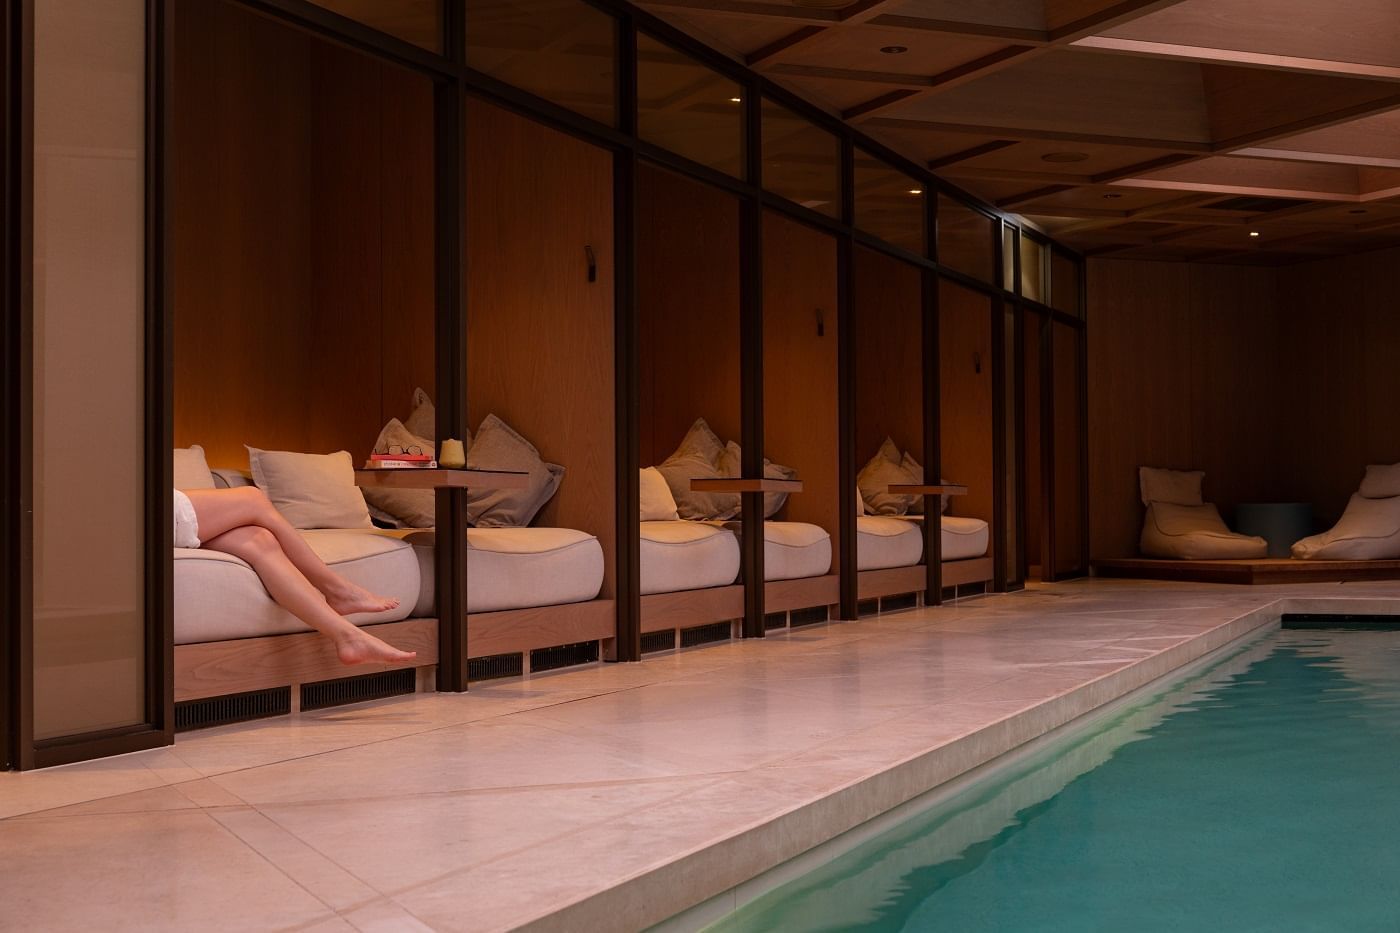 People relaxing on the comfy beds by the indoor pool at The Londoner